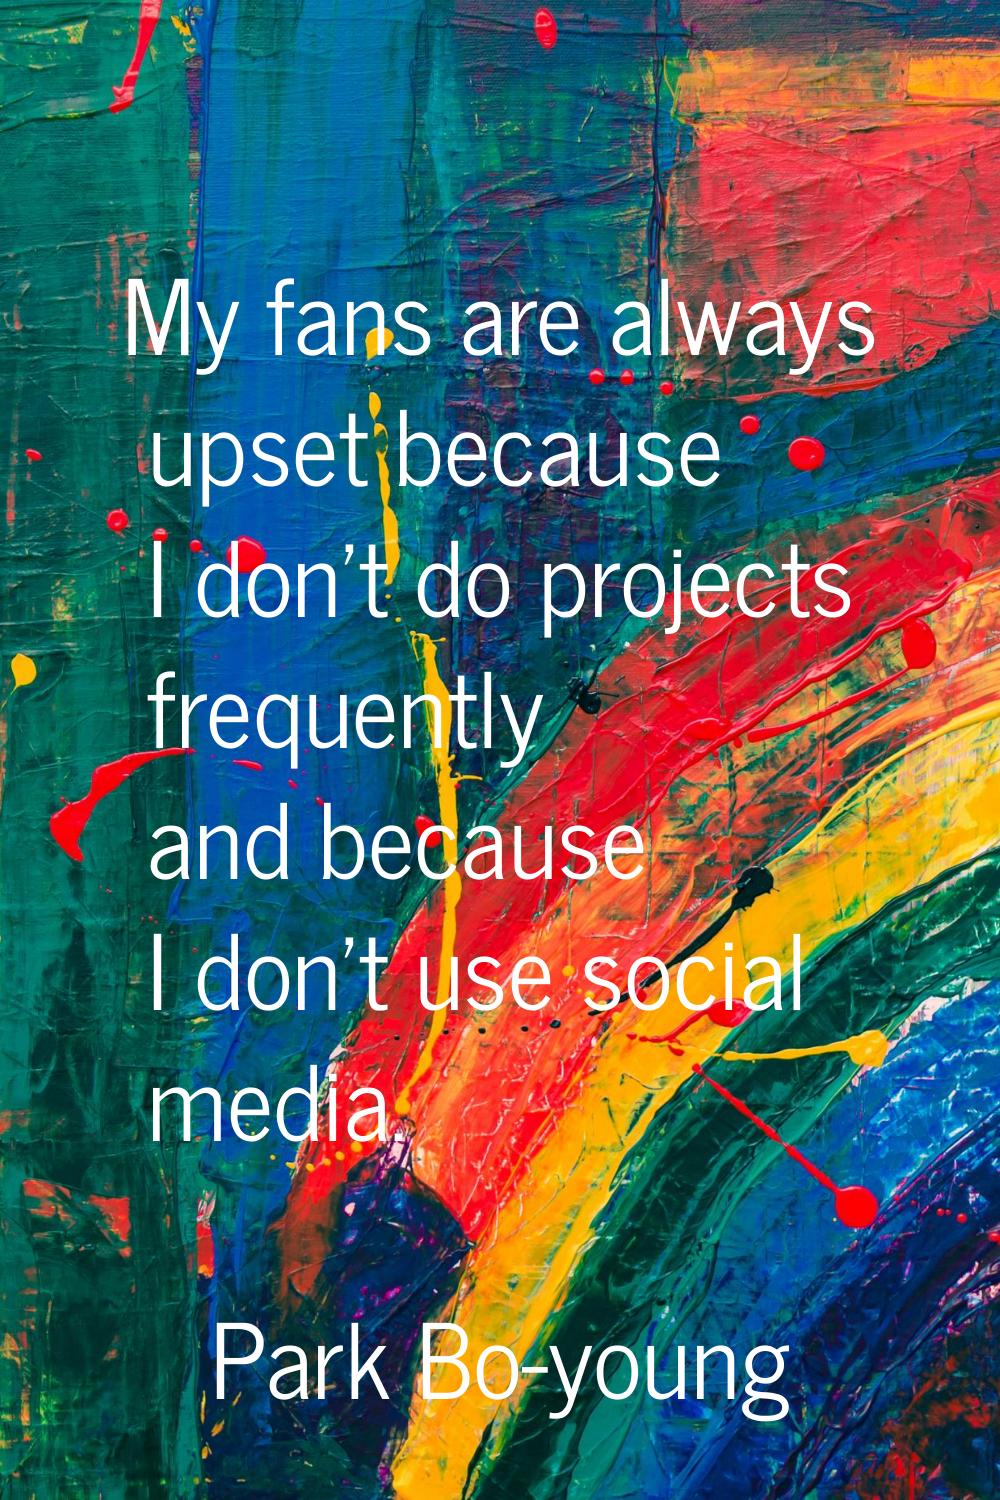 My fans are always upset because I don't do projects frequently and because I don't use social medi